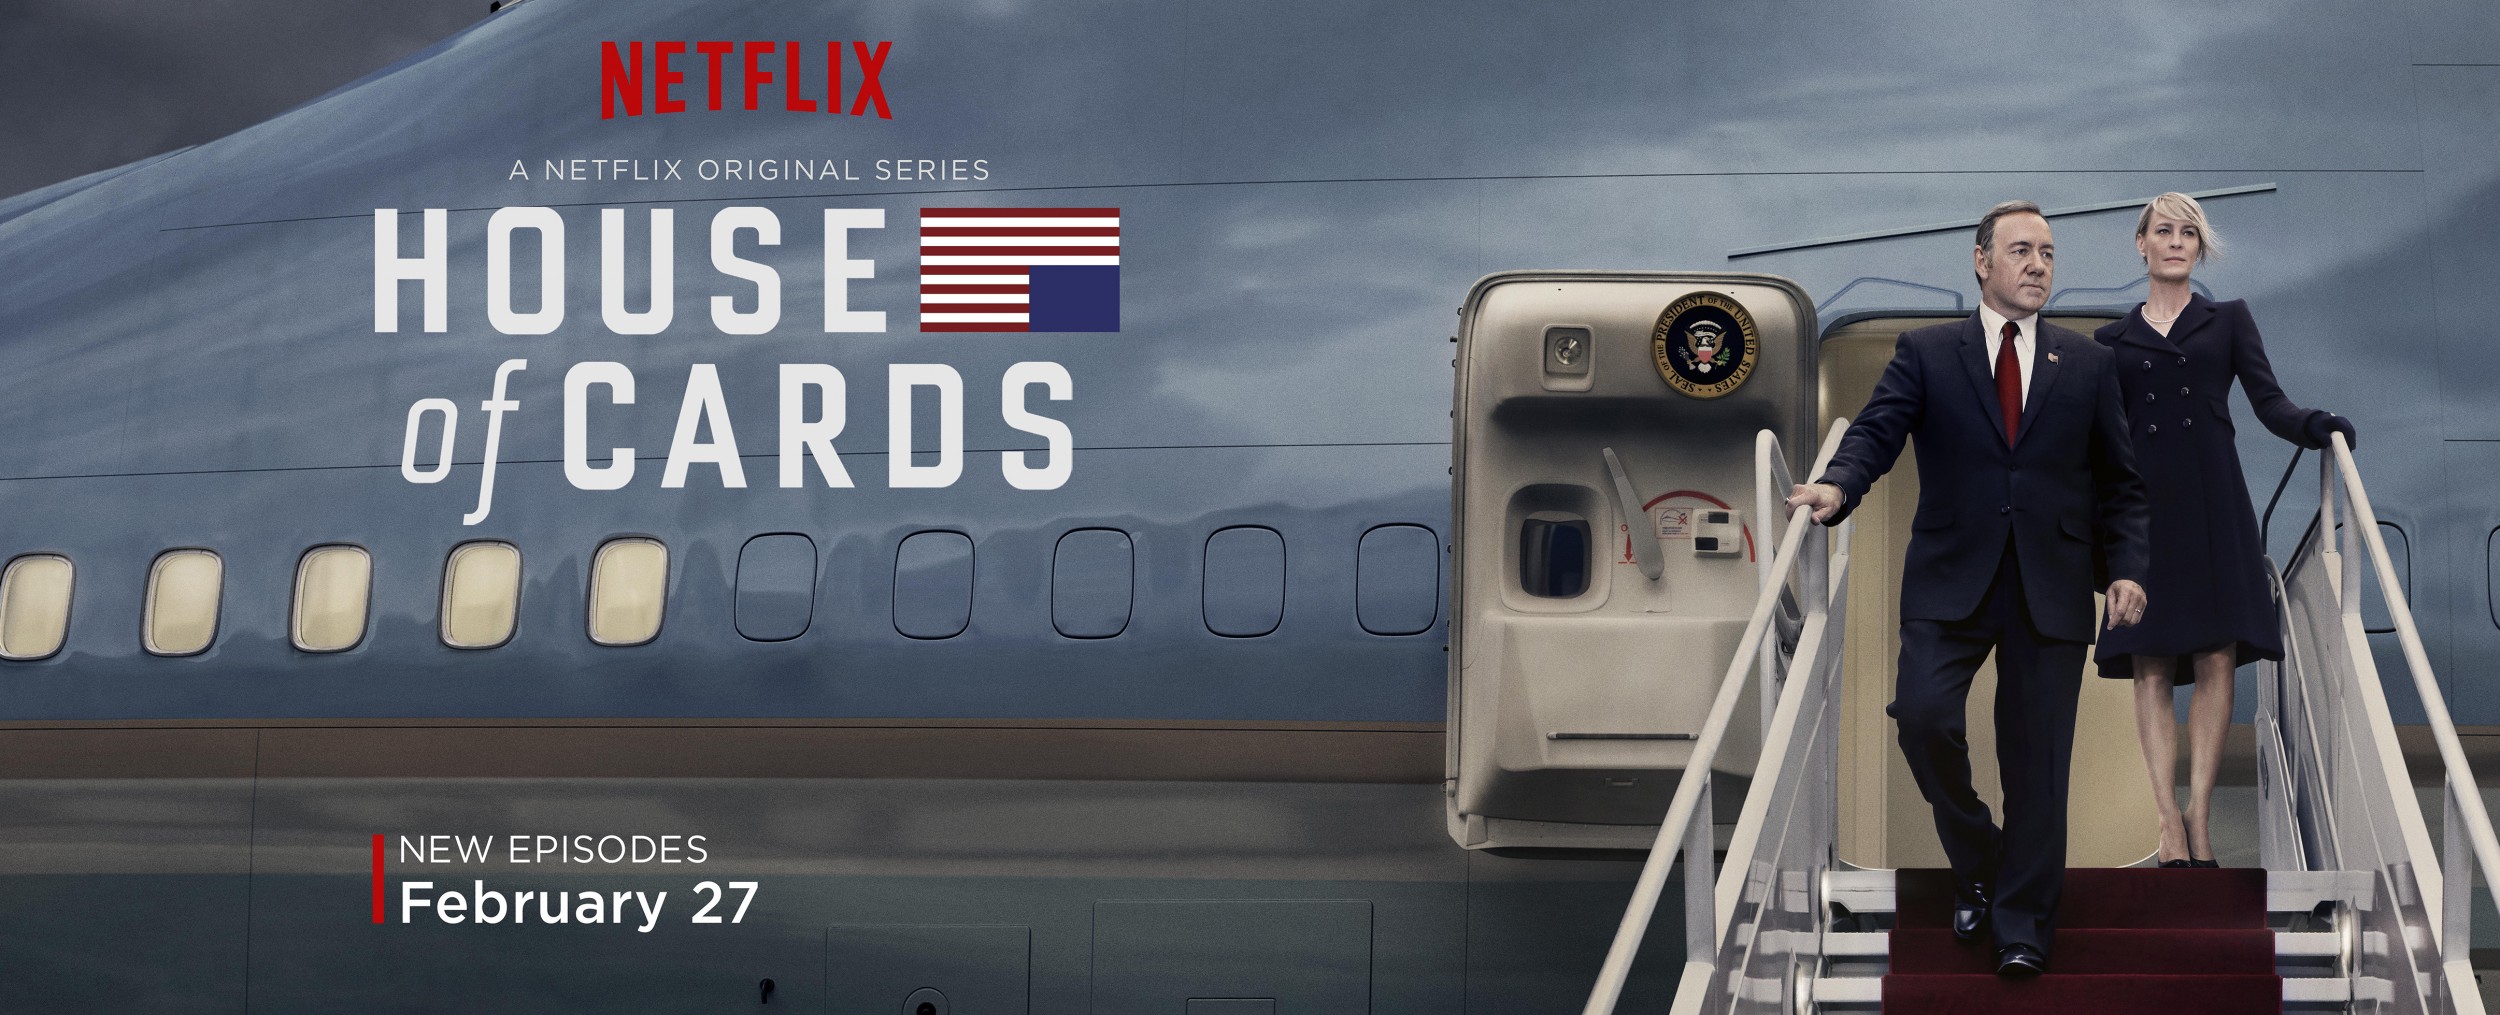 Mega Sized TV Poster Image for House of Cards (#6 of 10)